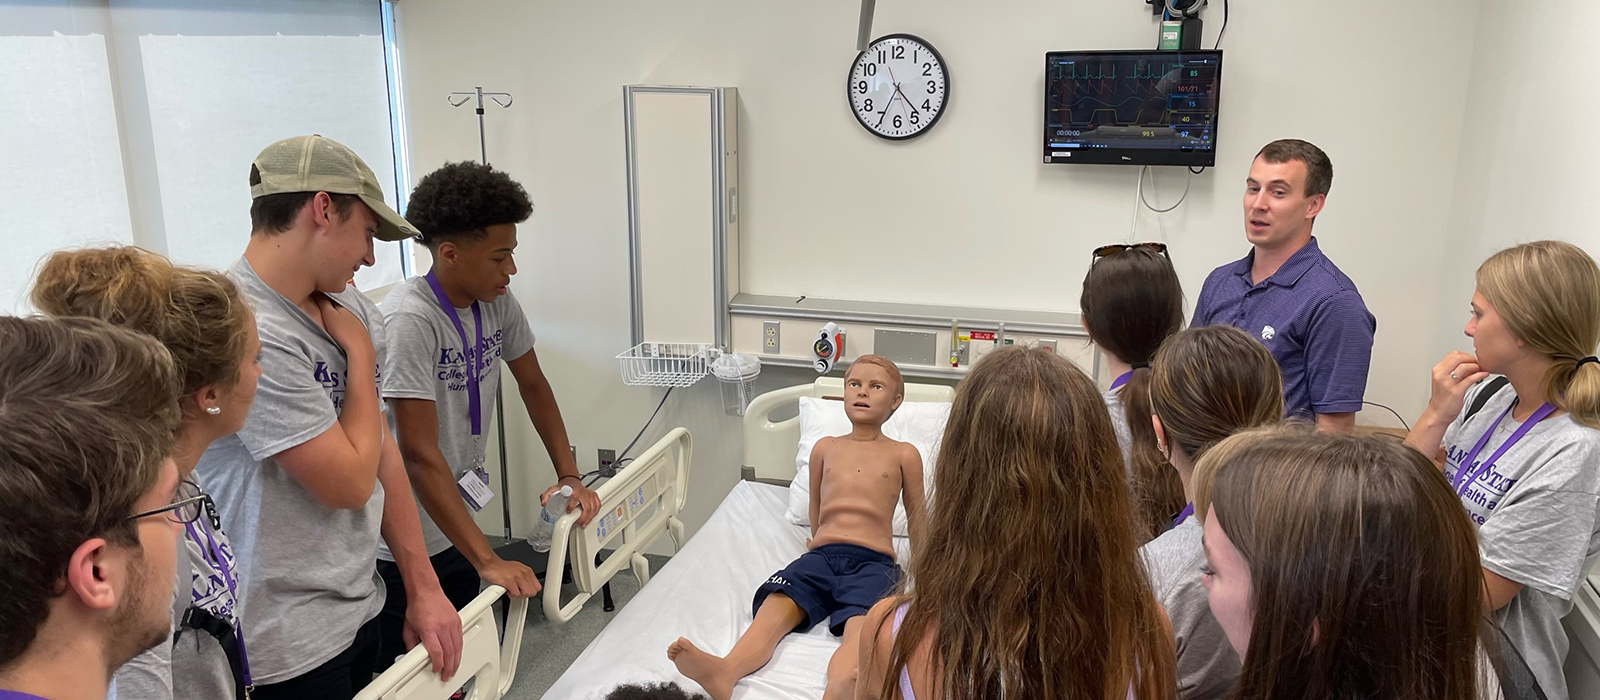 Students in simulation room